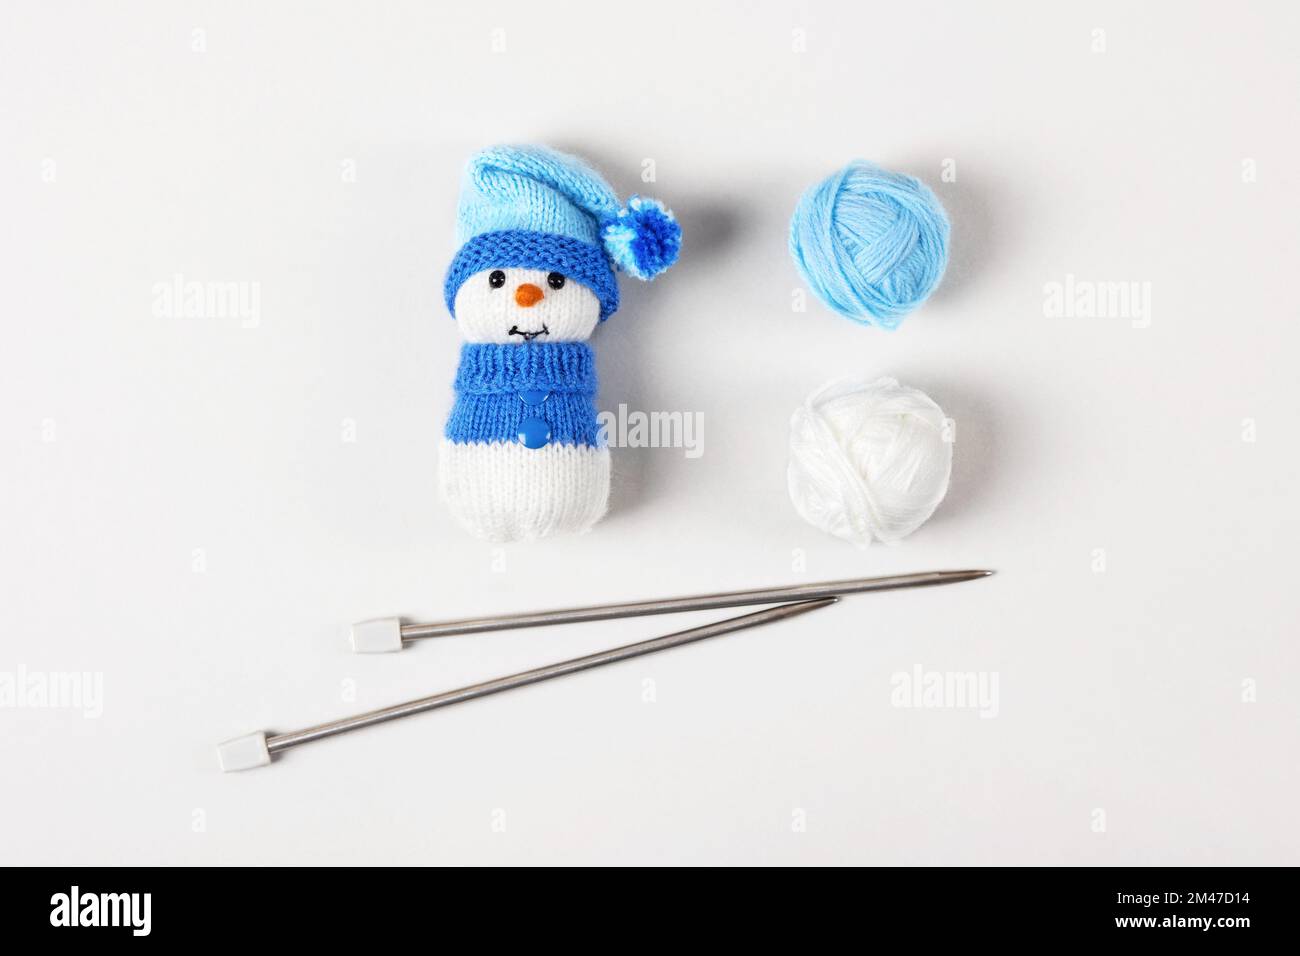 Knitted snowman in a blue hat and sweater with two balls of thread and knitting needles on a gray background. Knitted Christmas decorations Stock Photo